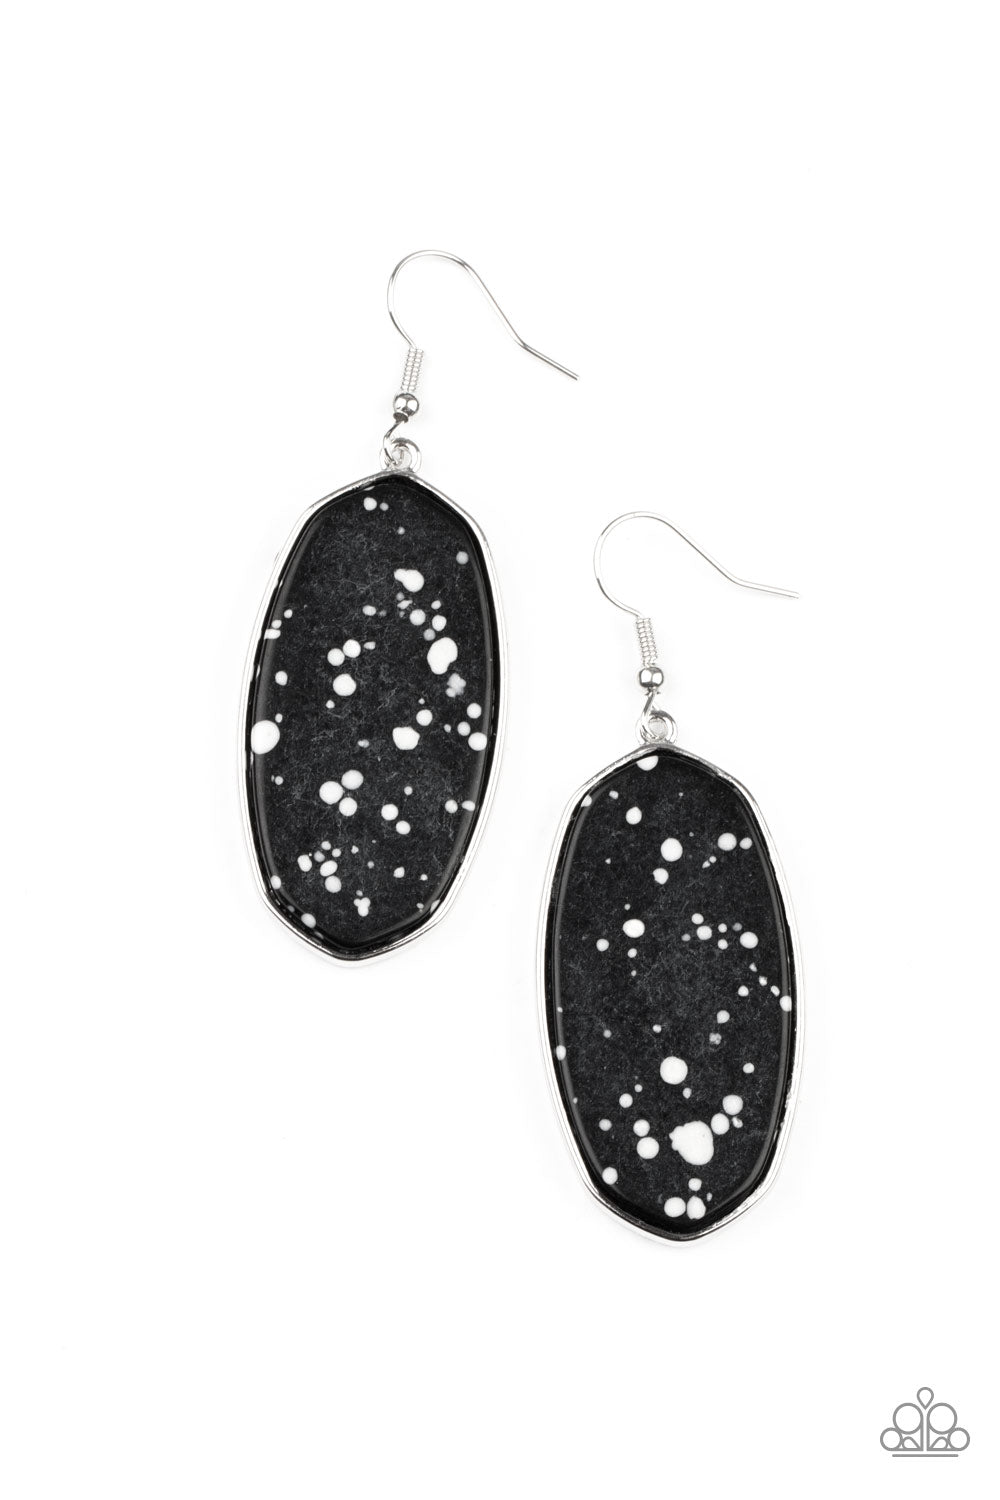 Speckled with white accents, a flat black stone is pressed into a sleek silver fitting for a colorfully seasonal look